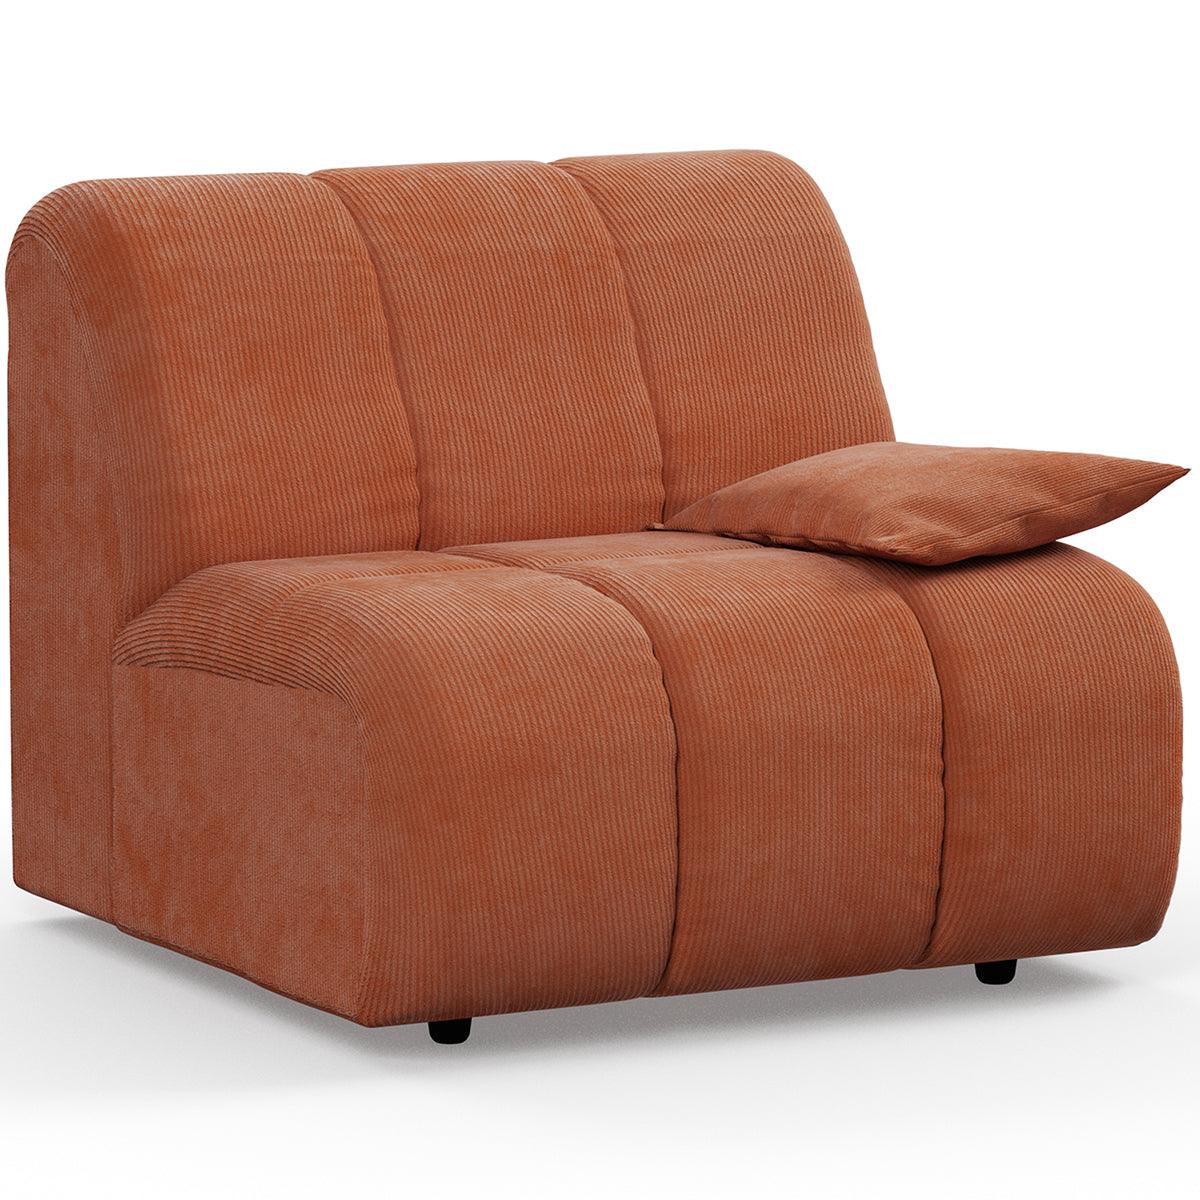 Wave Corduroy Rib Couch - Element Right Low Arm - WOO .Design